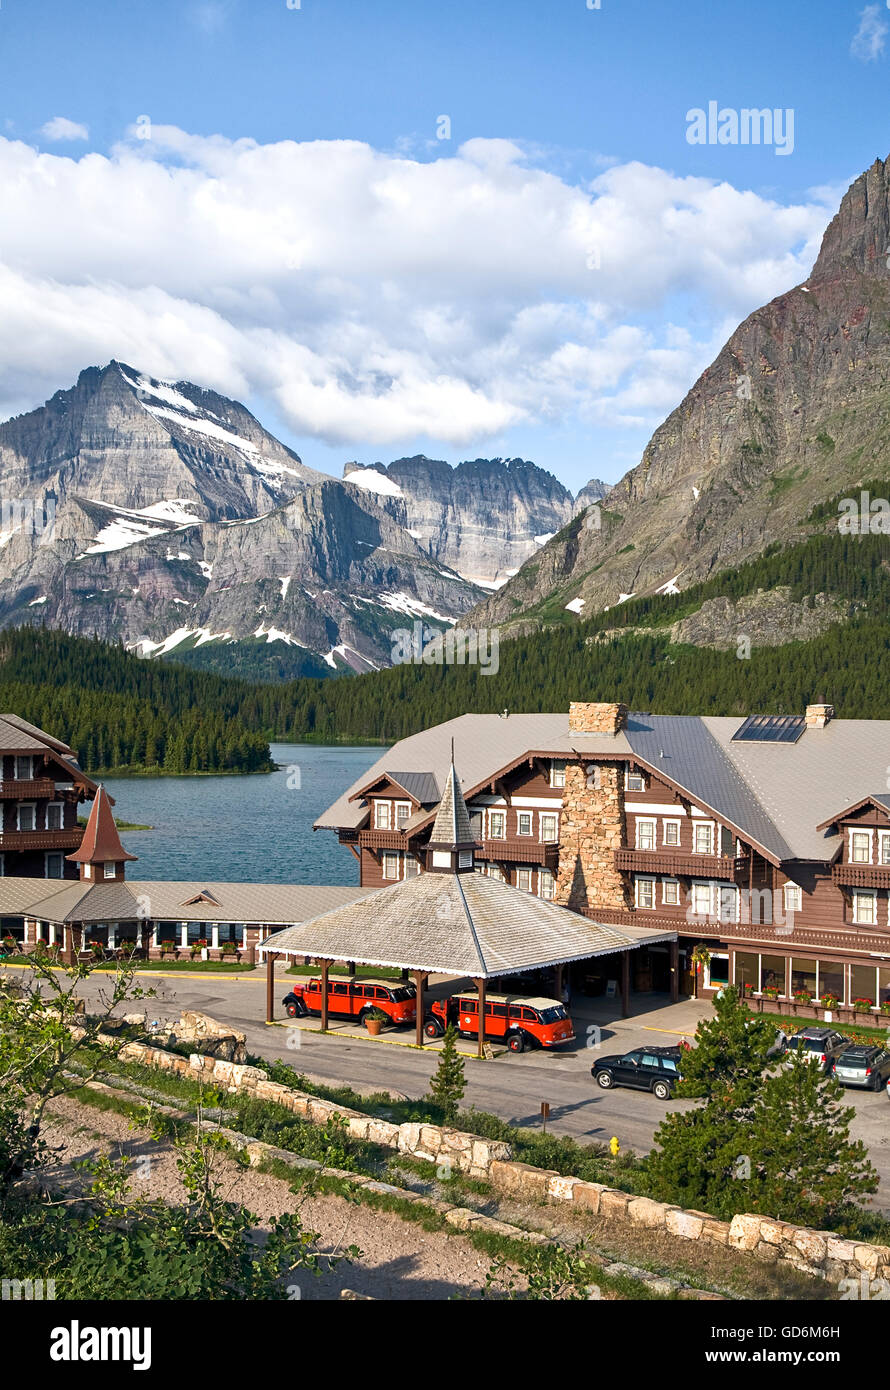 Many Glacier hotel on Swiftcurrent Lake, with historic Red Buses under the port cochere.  The Red Buss are considered the symbol of GNP and are fresh from a full restoration by the Ford Motor Company.  Built between 1936-39, they have tops that roll back Stock Photo